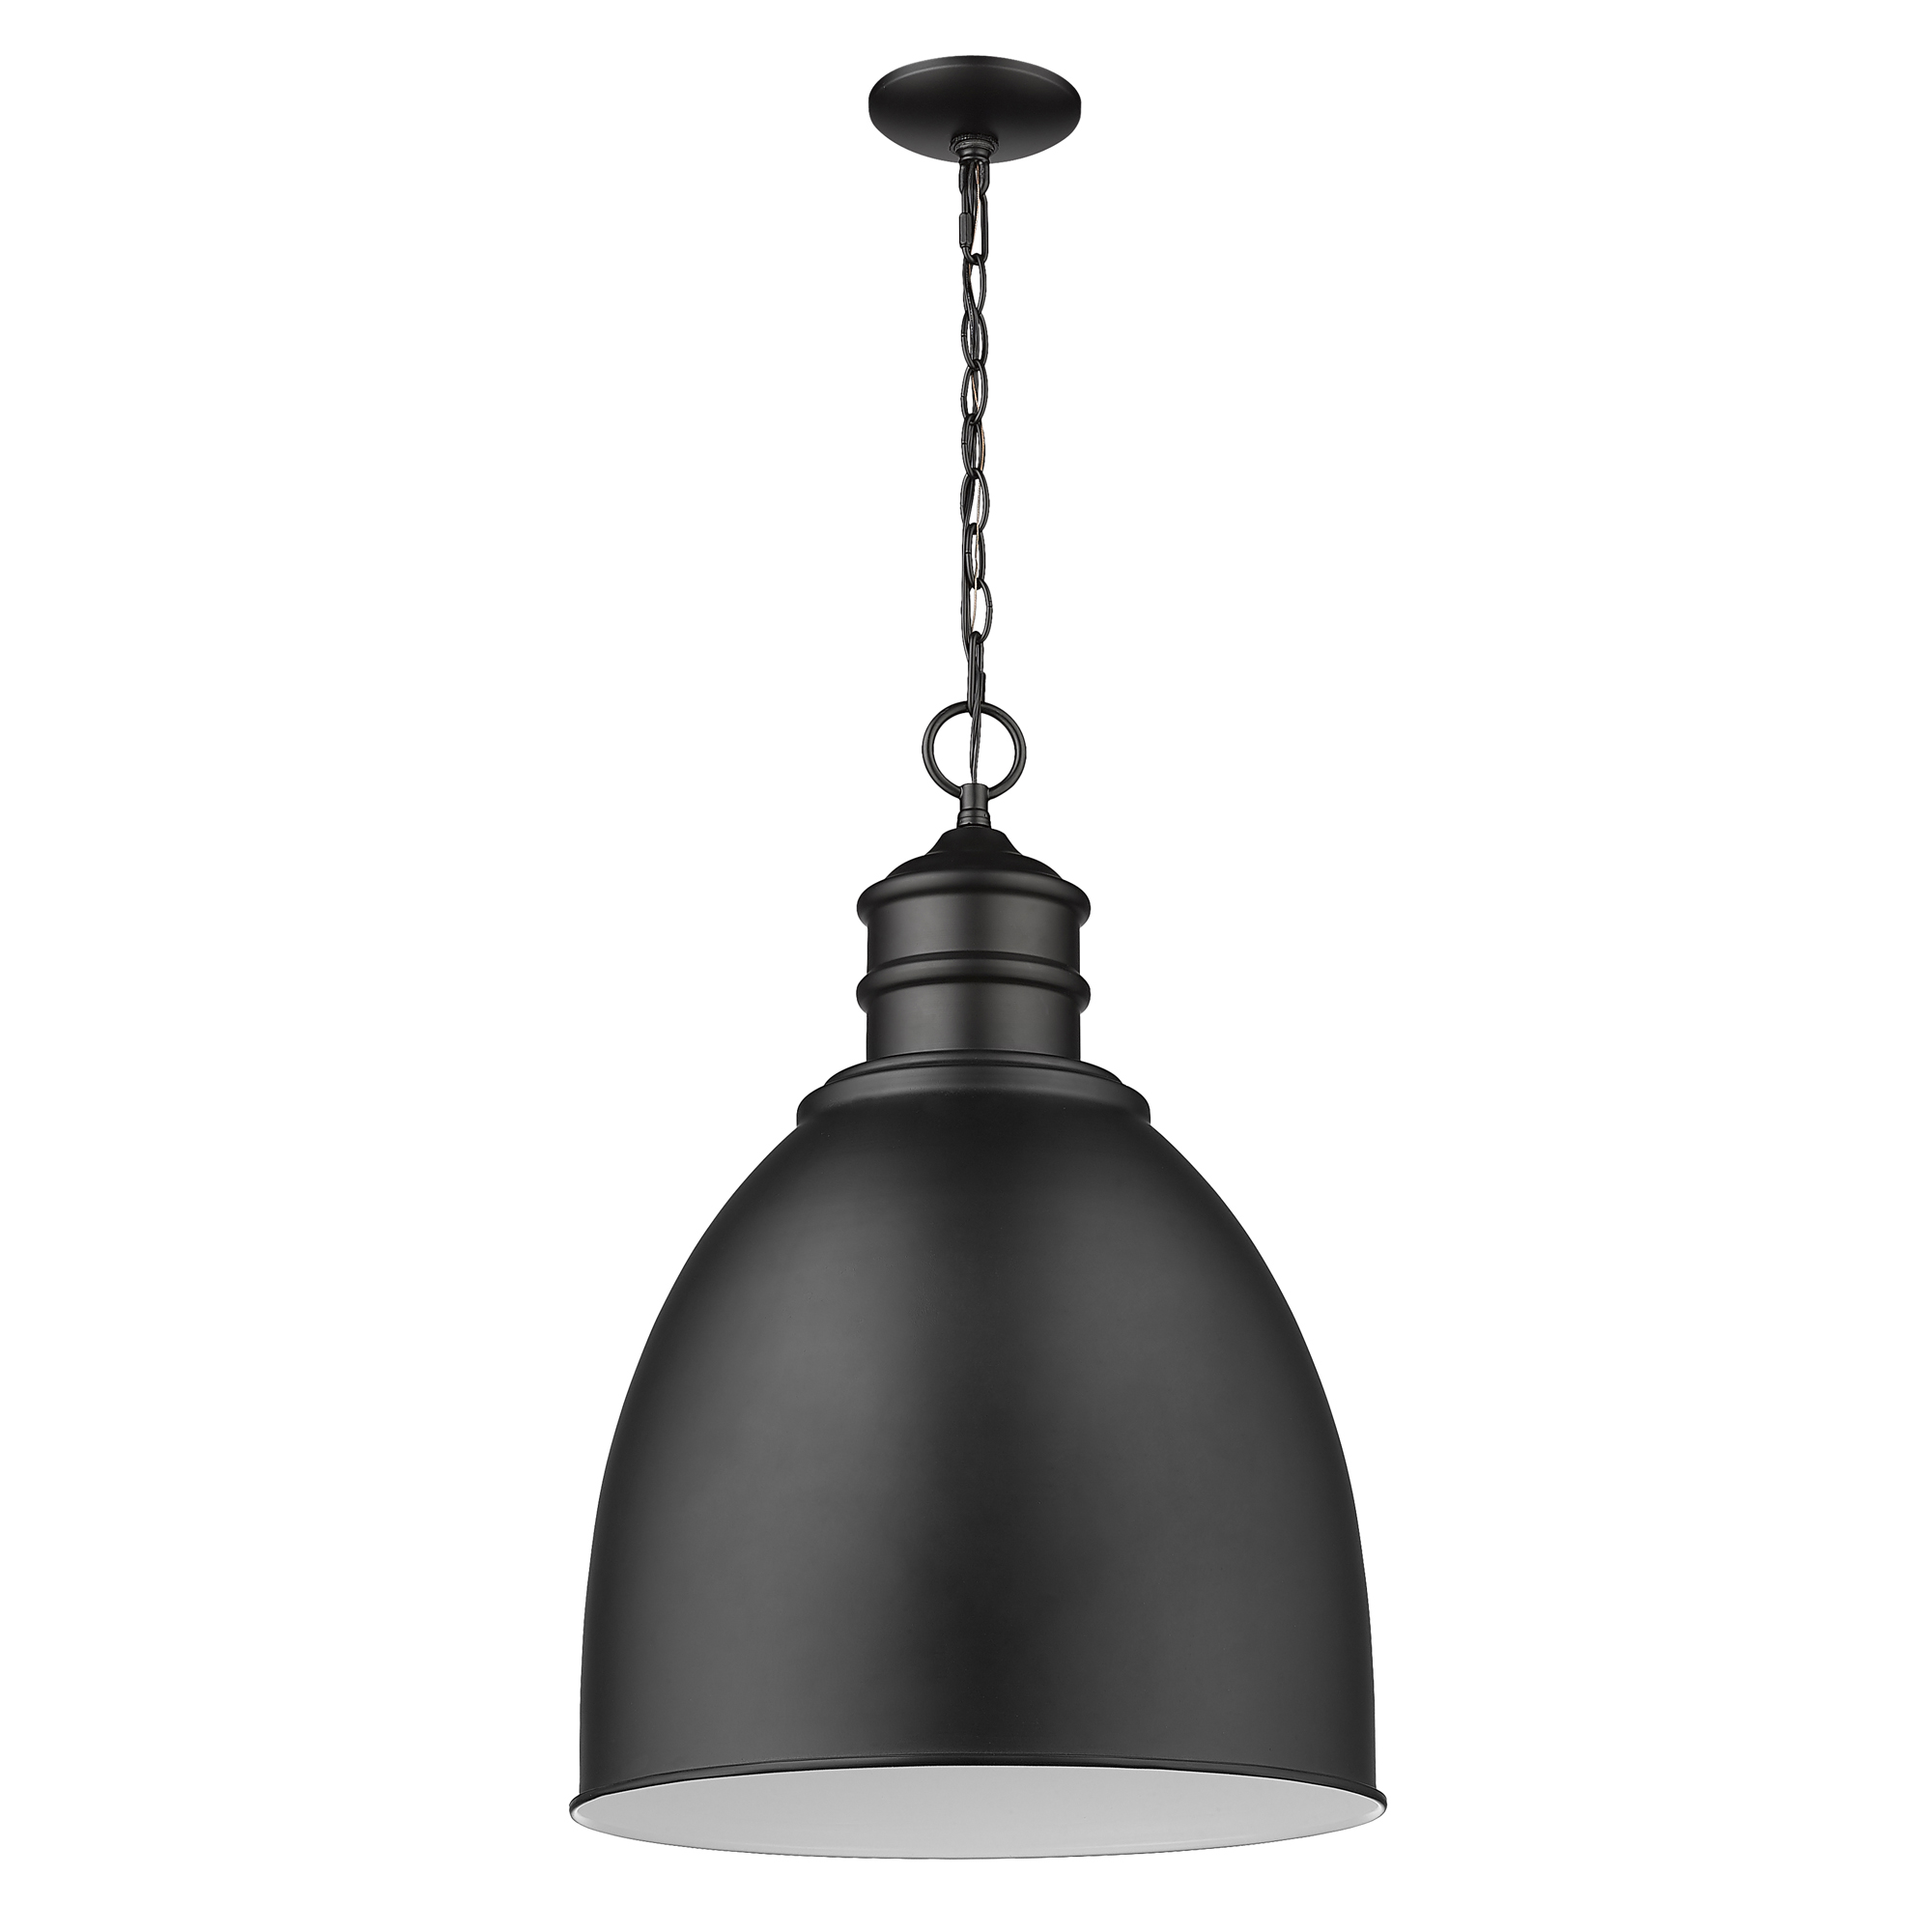 Acclaim Lighting-IN11170BK-Colby - One Light Pendant in Farmhouse Style - 17.5 Inches Wide by 25.25 Inches High   Matte Black Finish